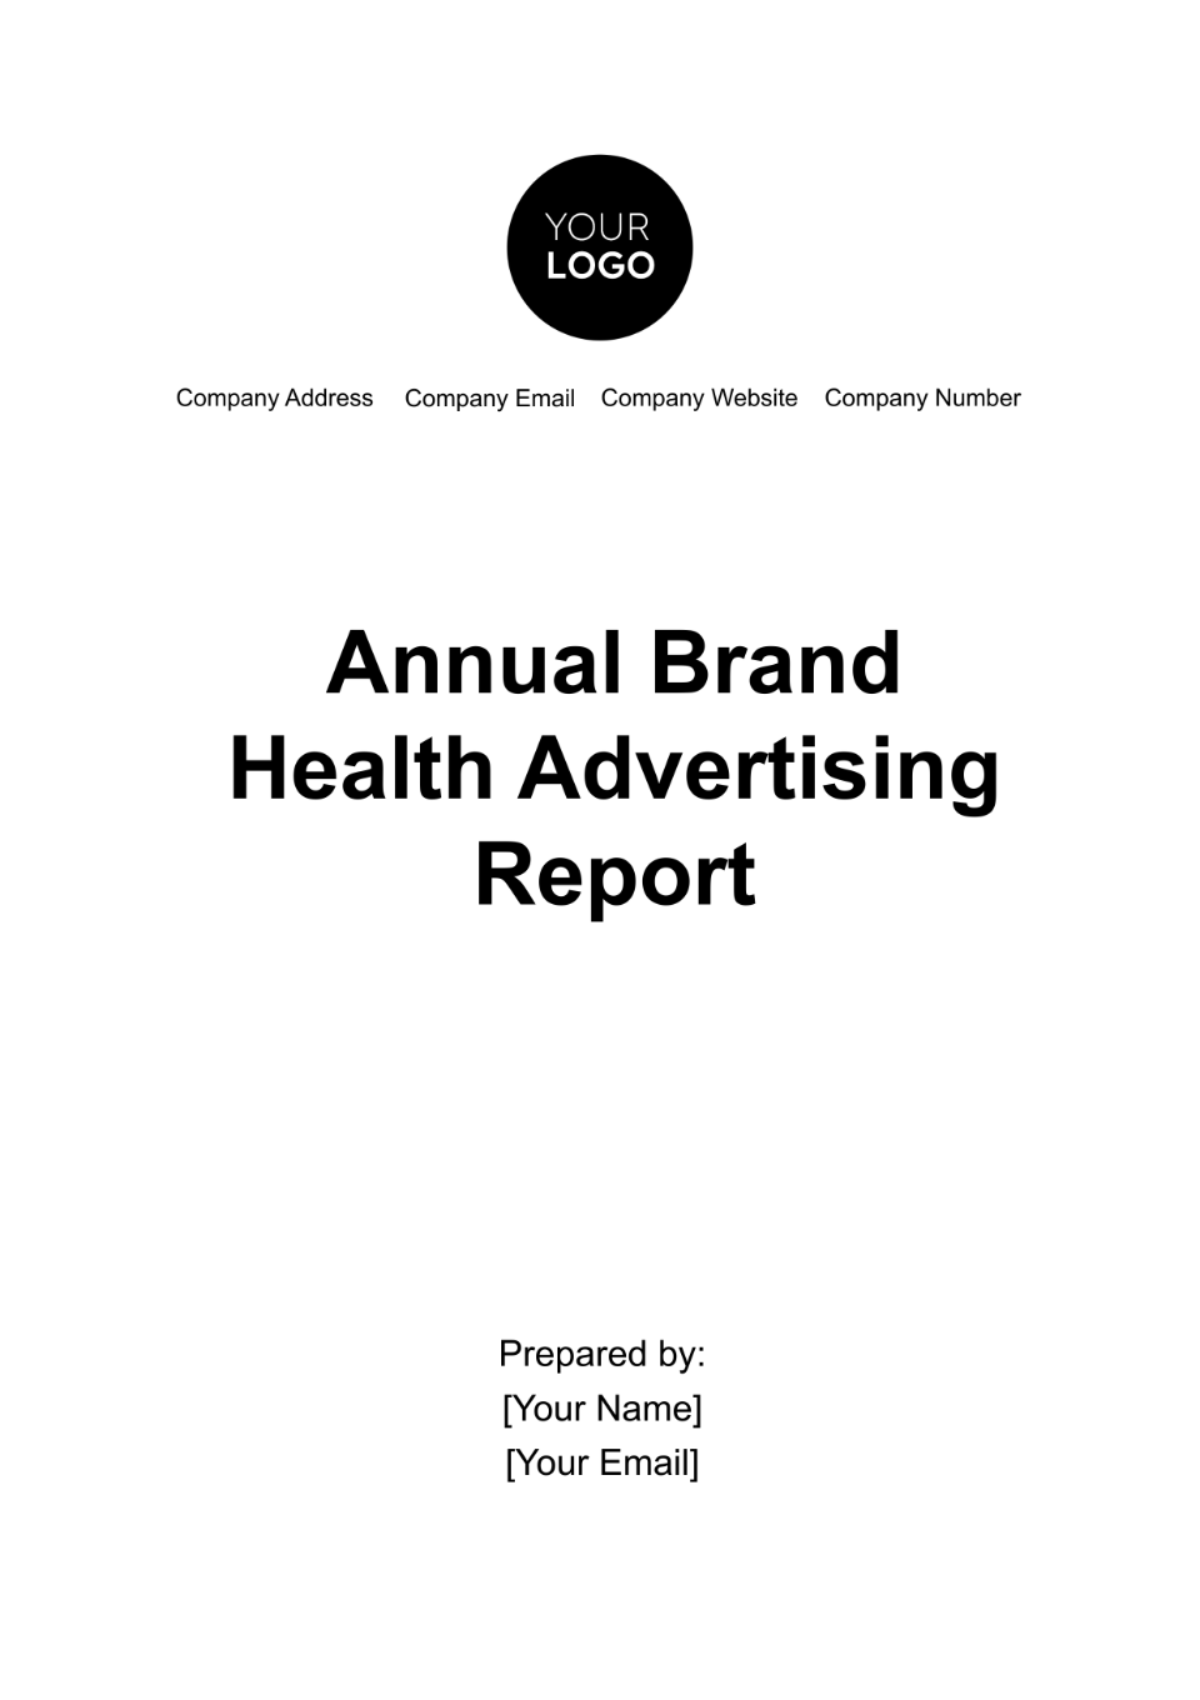 Annual Brand Health Advertising Report Template